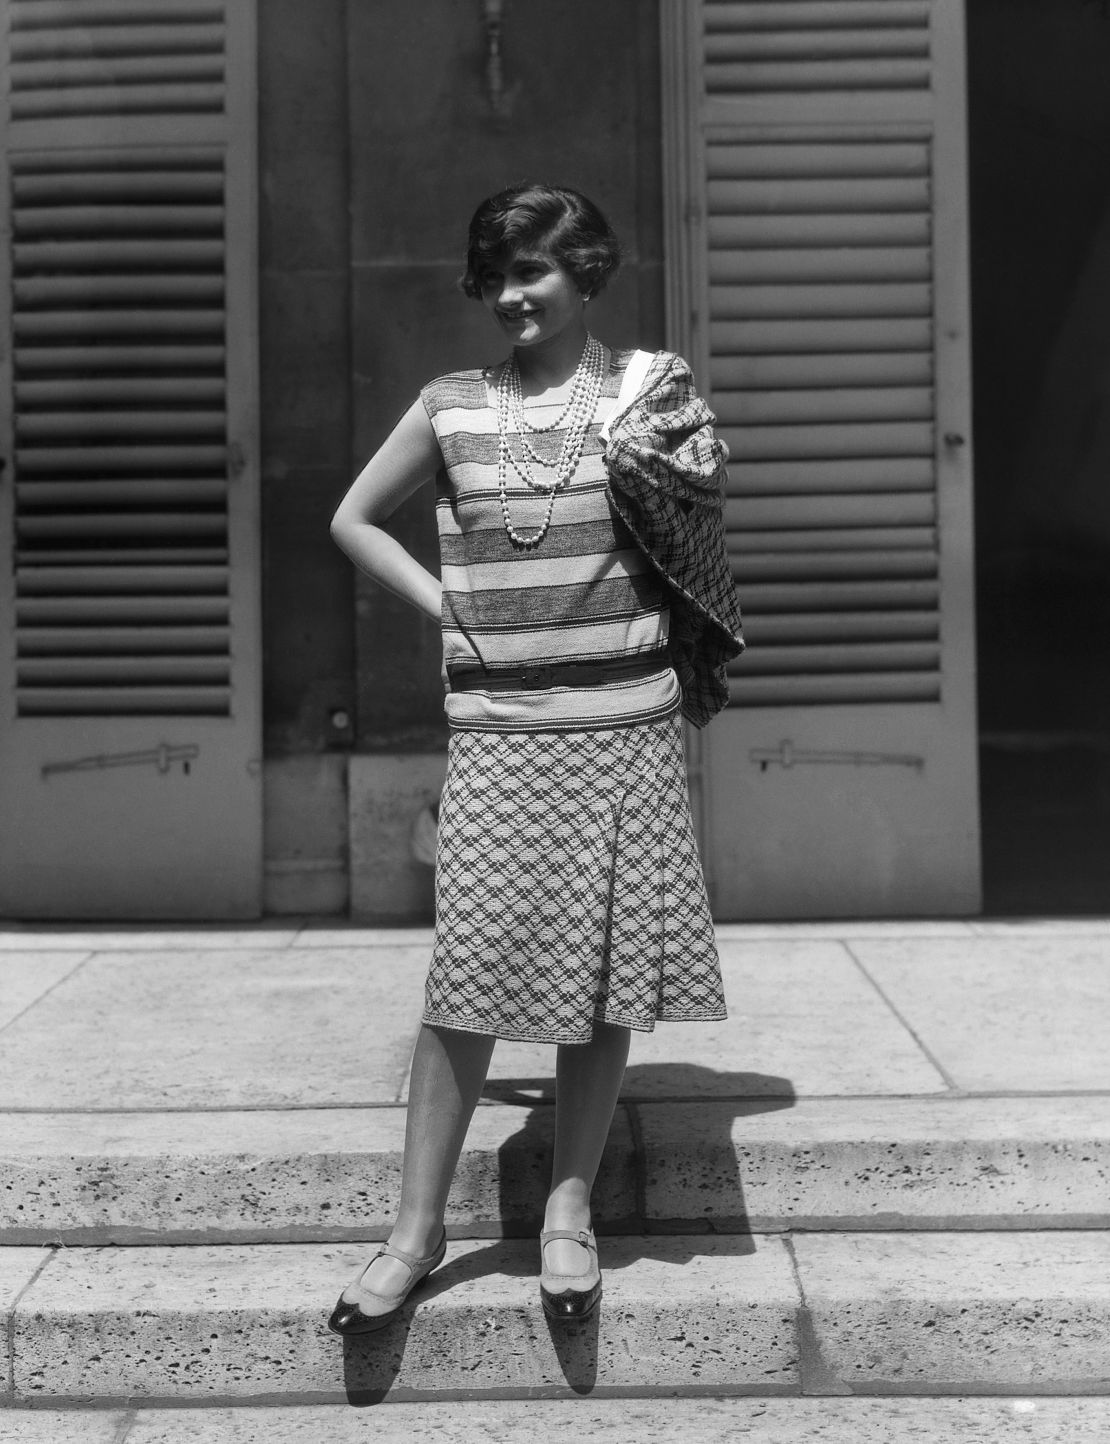 A Feminist Icon? The Historical Leadership of Coco Chanel